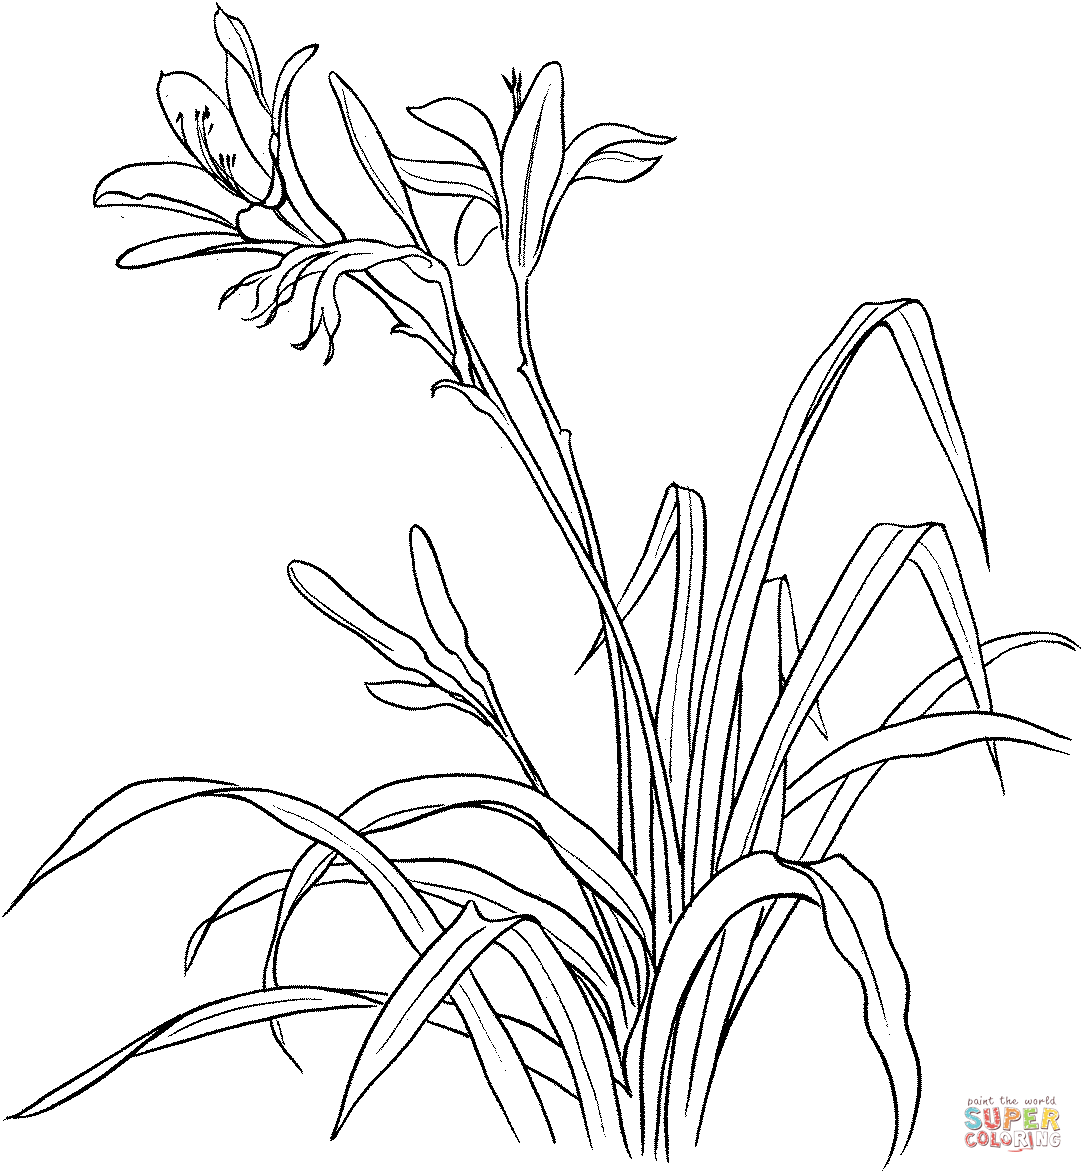 Daylily coloring #18, Download drawings